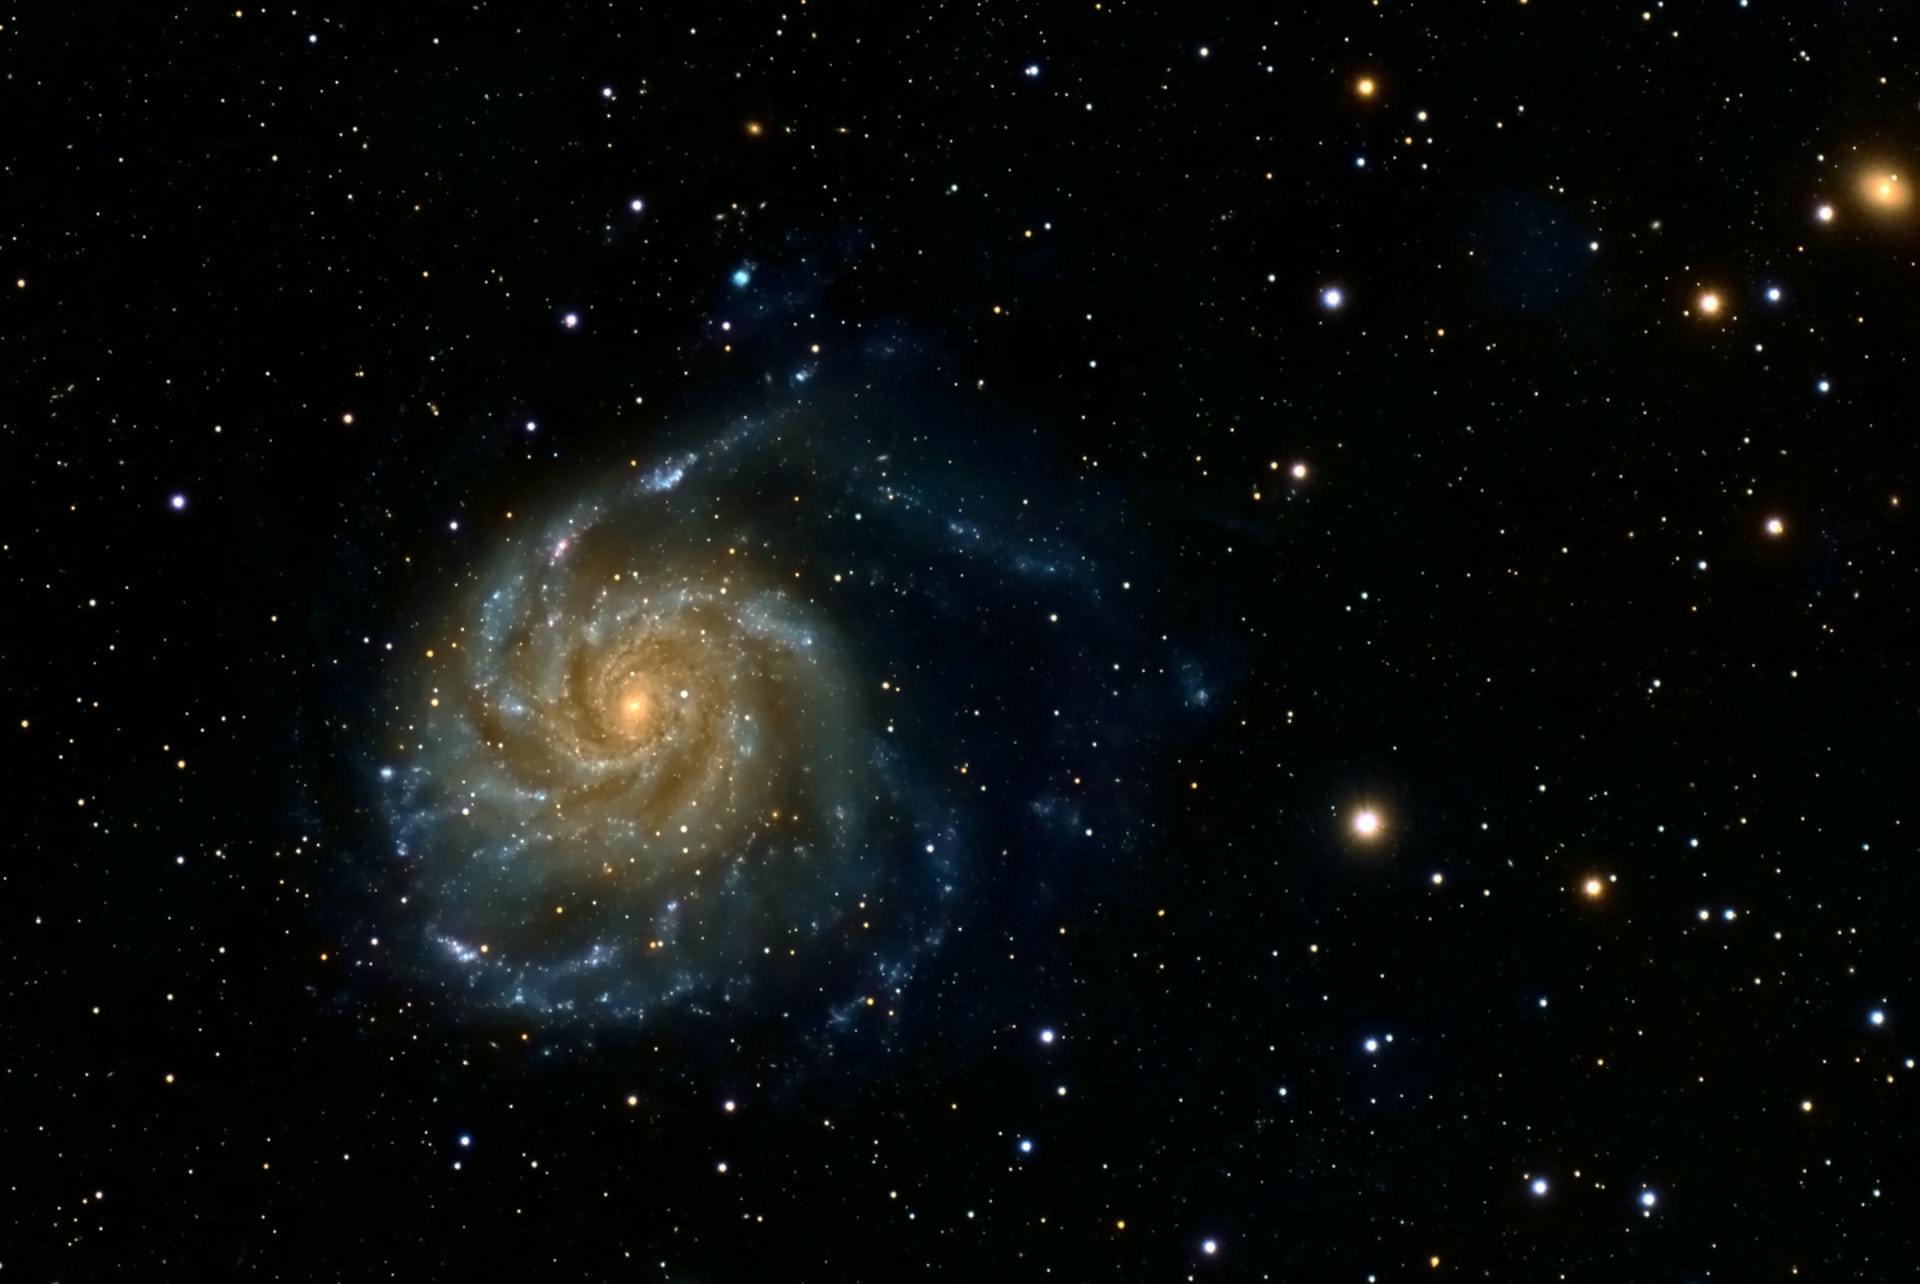 Messier 101 - the Pinwheel Galaxy. A grand-design spiral galaxy that's estimated to be about 21 million light years away